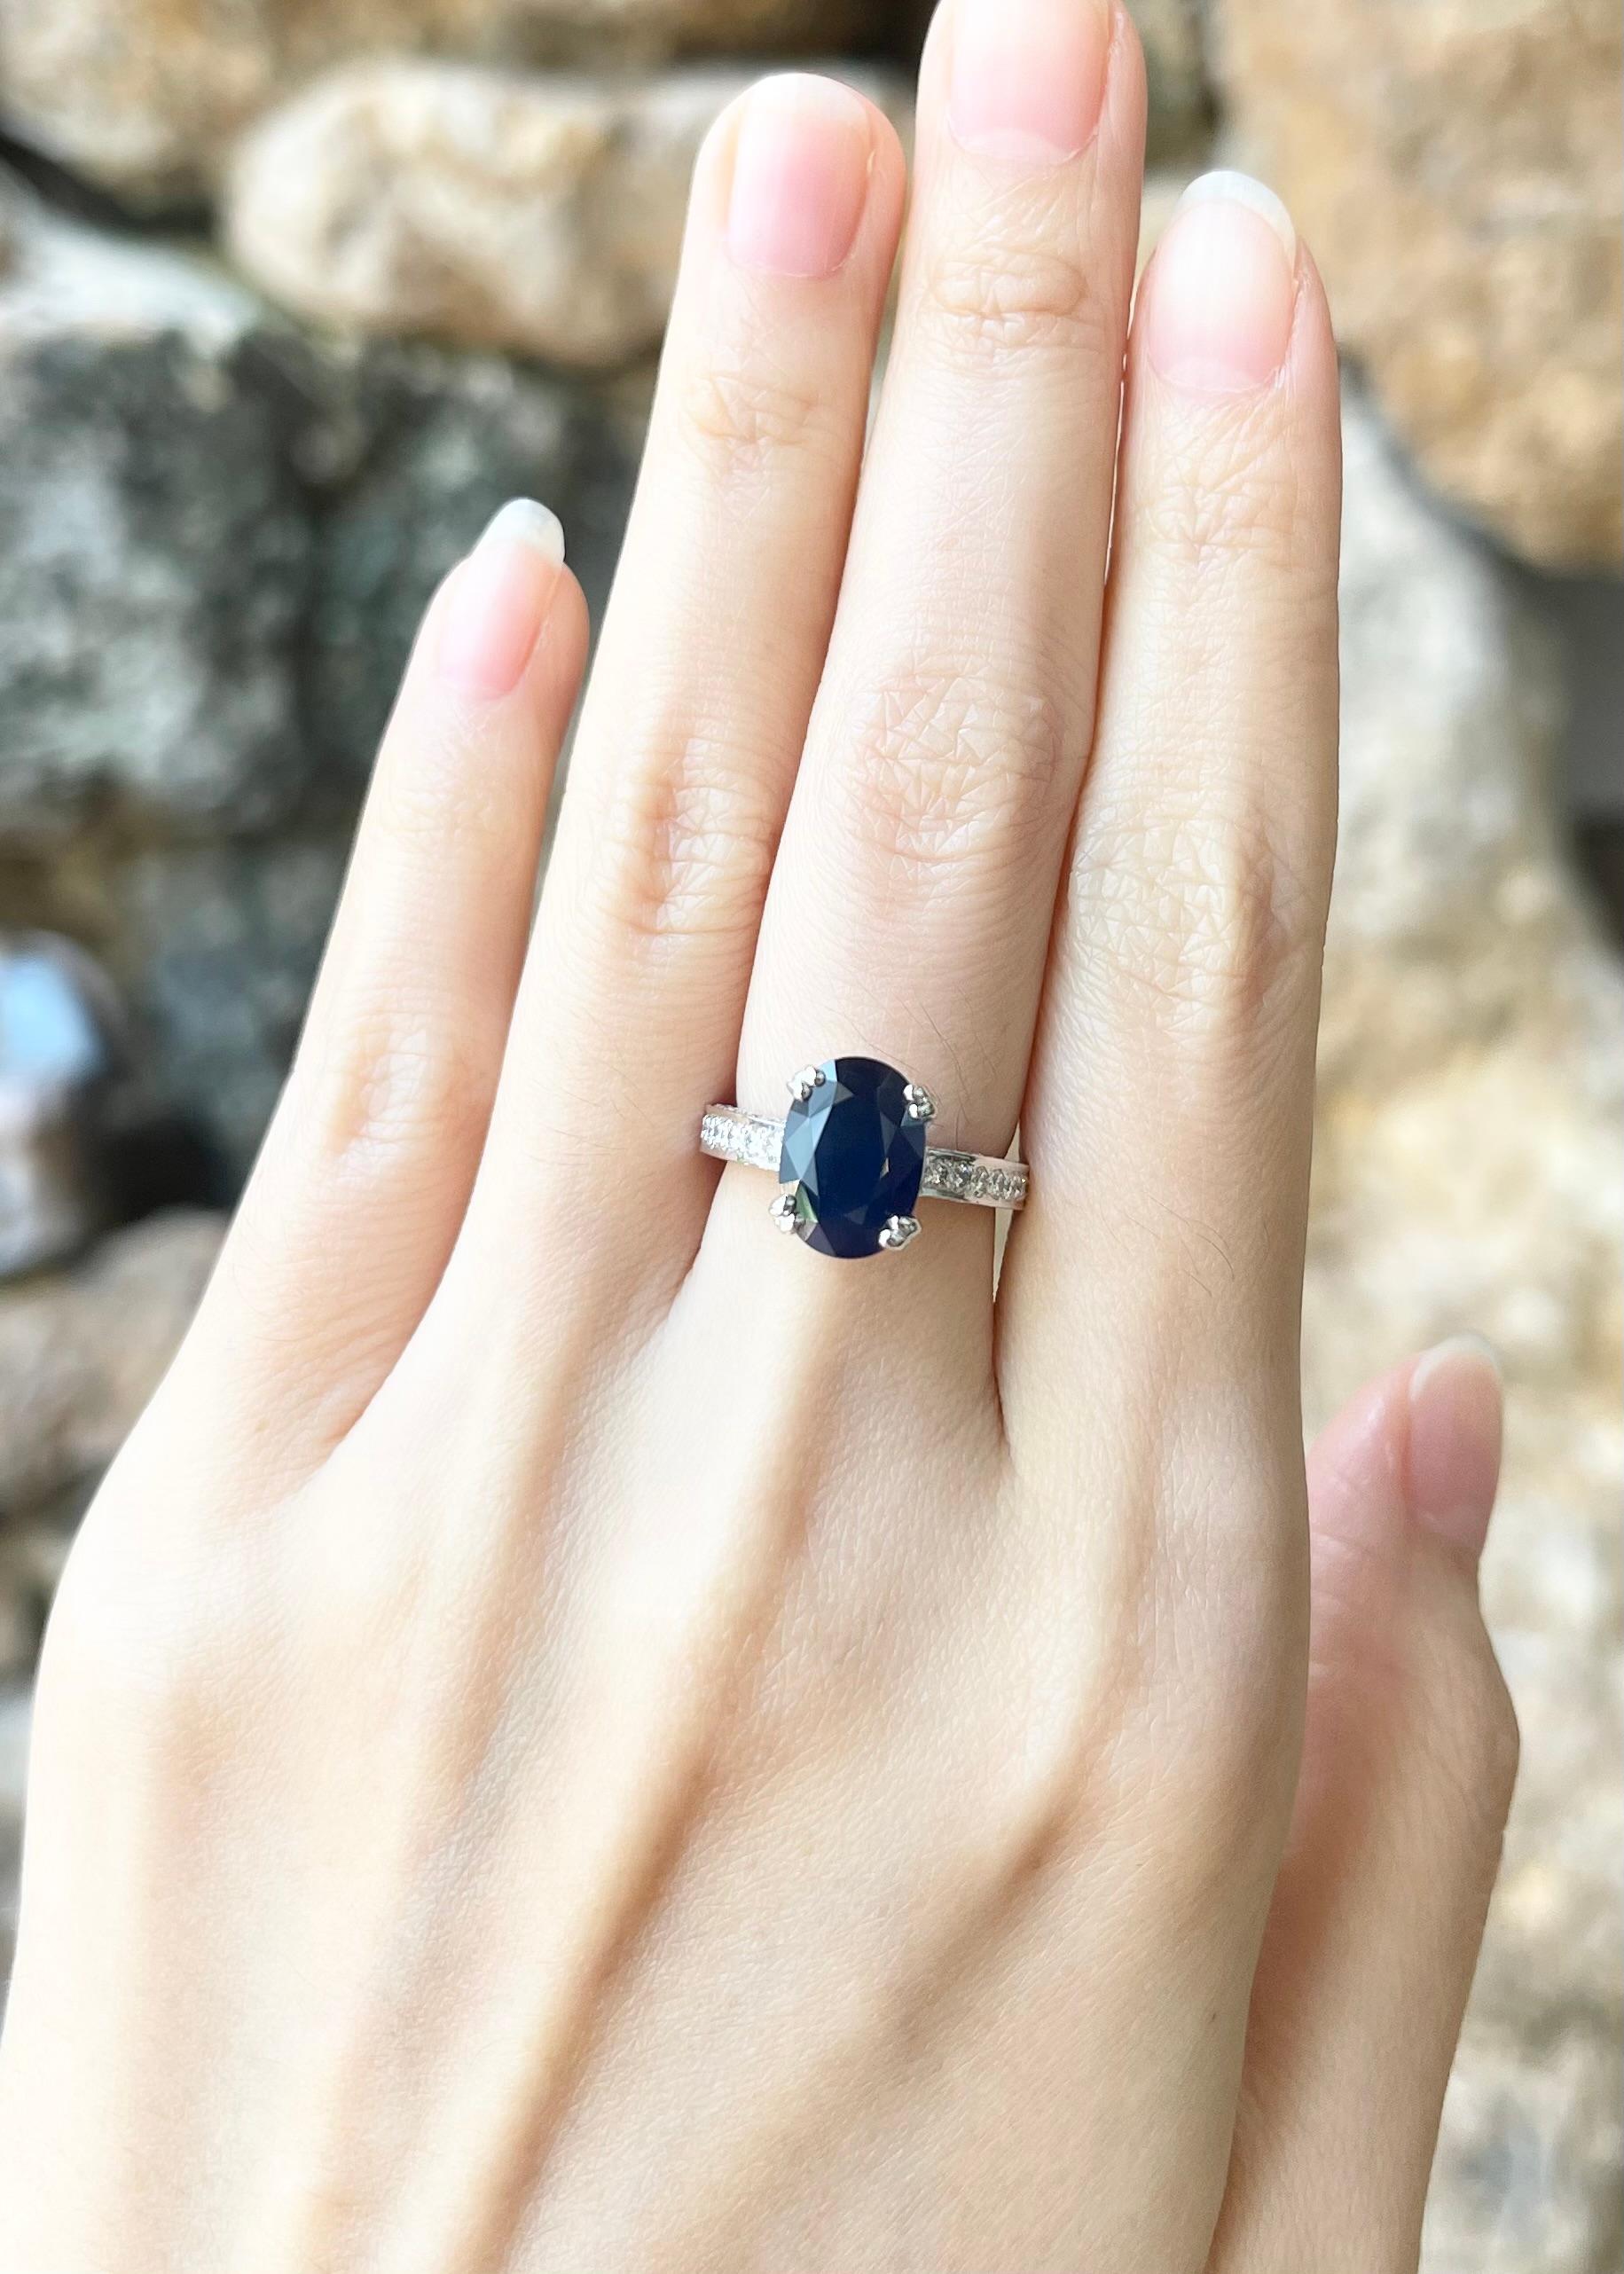 Blue Sapphire 3.32 carats with Diamond 1.35 carats Ring set in 18K White Gold Settings

Width:  0.8 cm 
Length: 1.0 cm
Ring Size: 49
Total Weight: 5.02 grams

